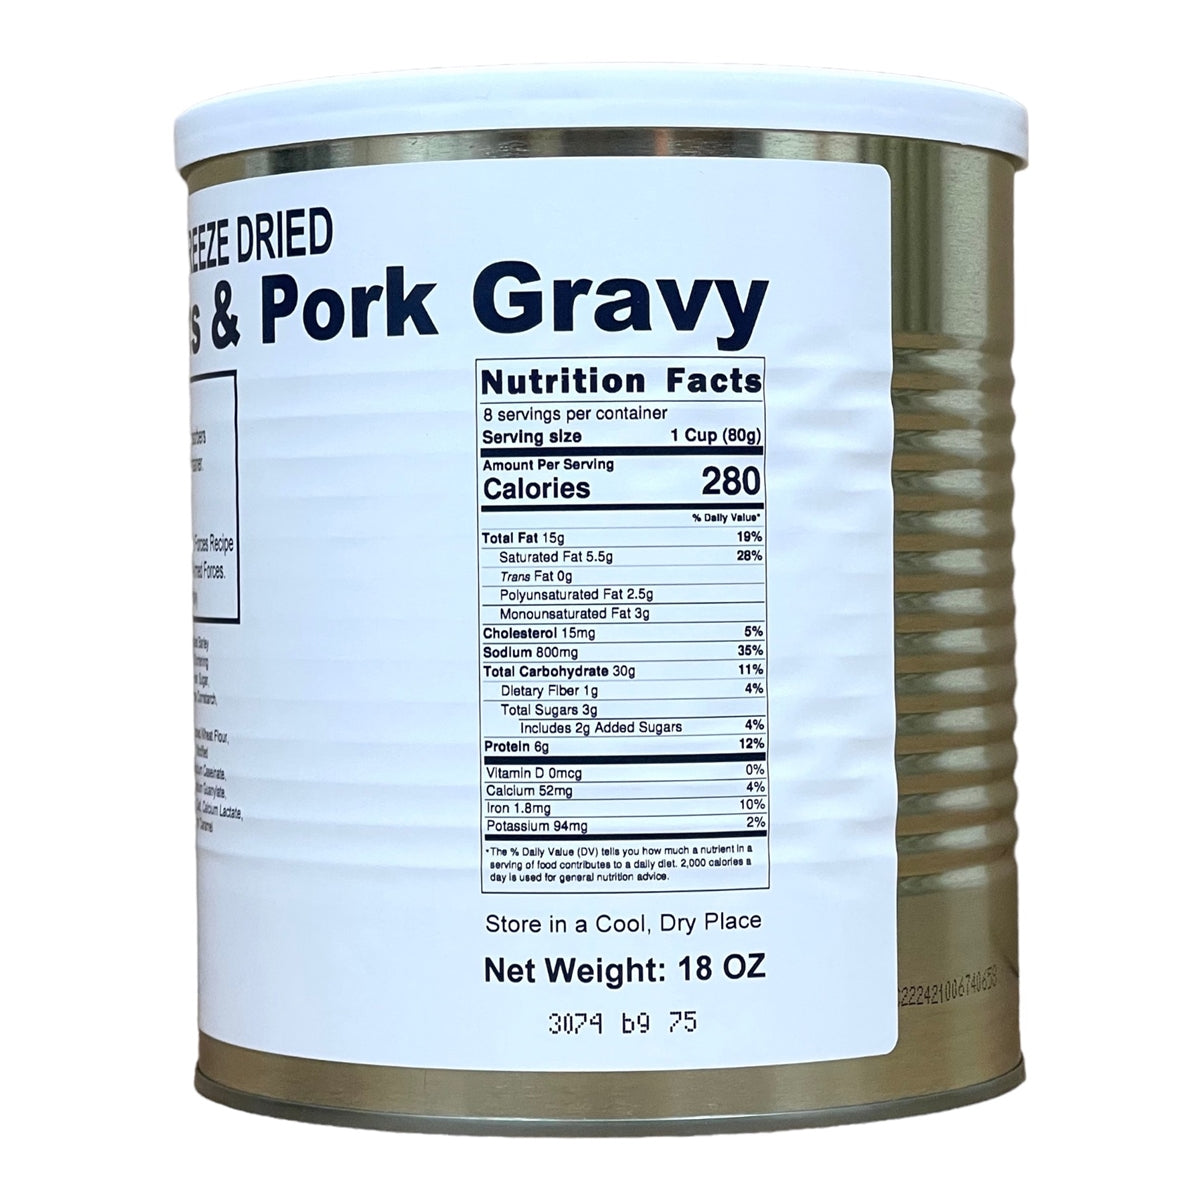 Military Surplus Freeze Dried Biscuits and Gravy